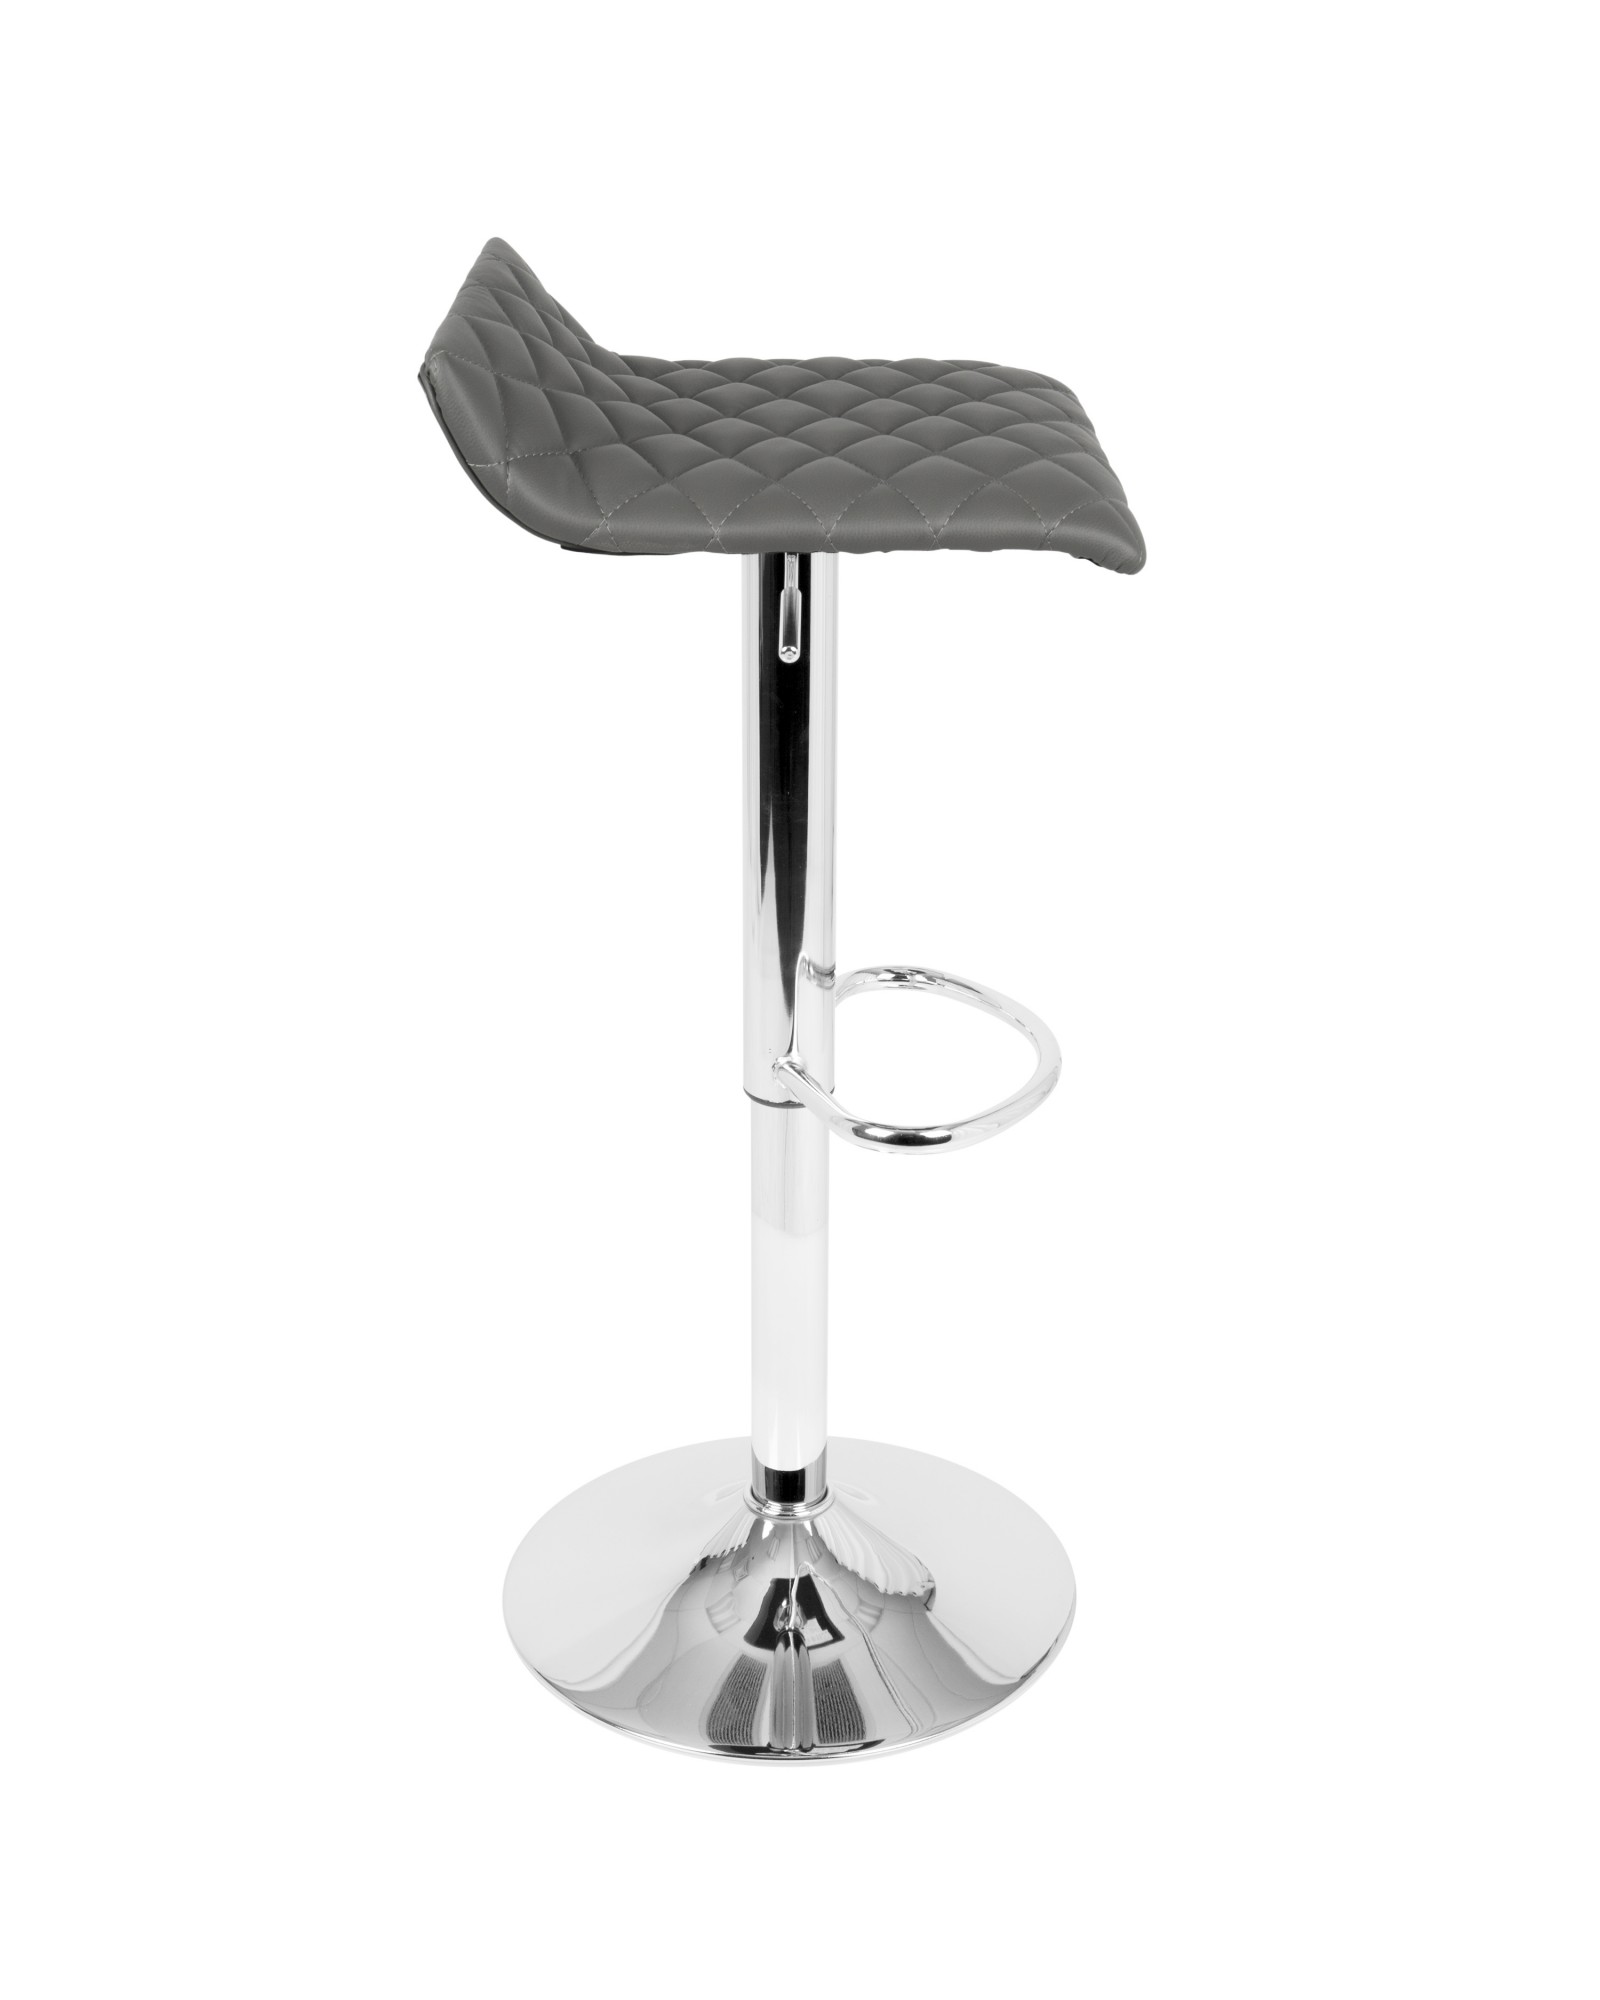 Cavale Contemporary Adjustable Barstool in Grey Faux Leather